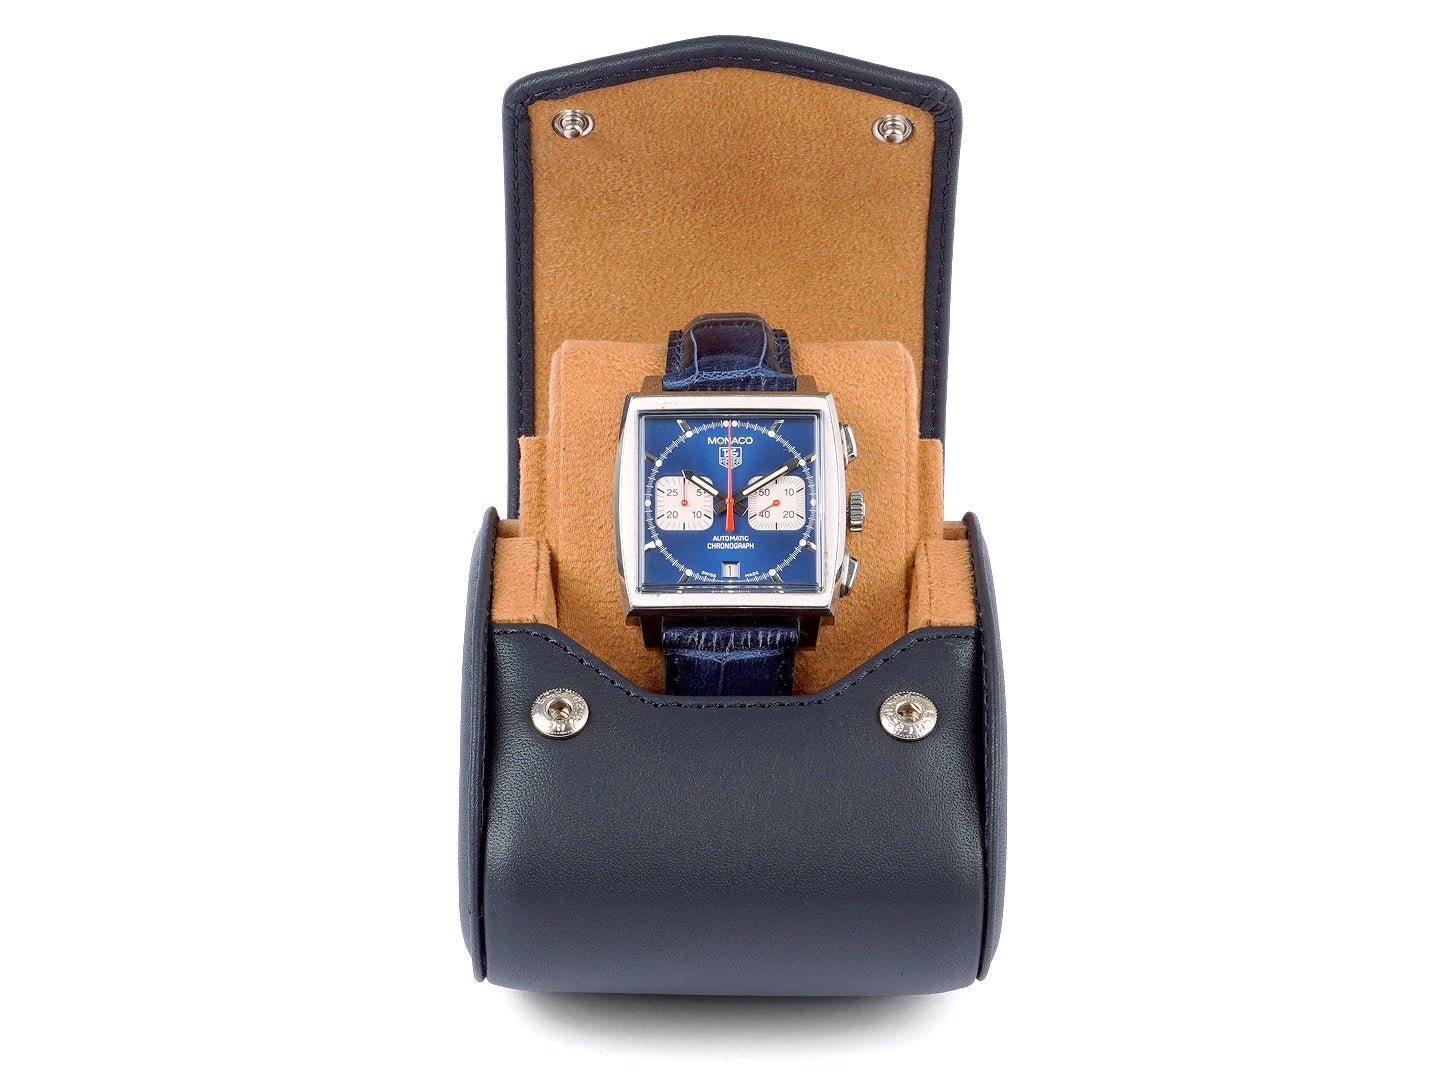 Travel Watch Case For 1 Watch - Stand Function - Navy Blue Leather